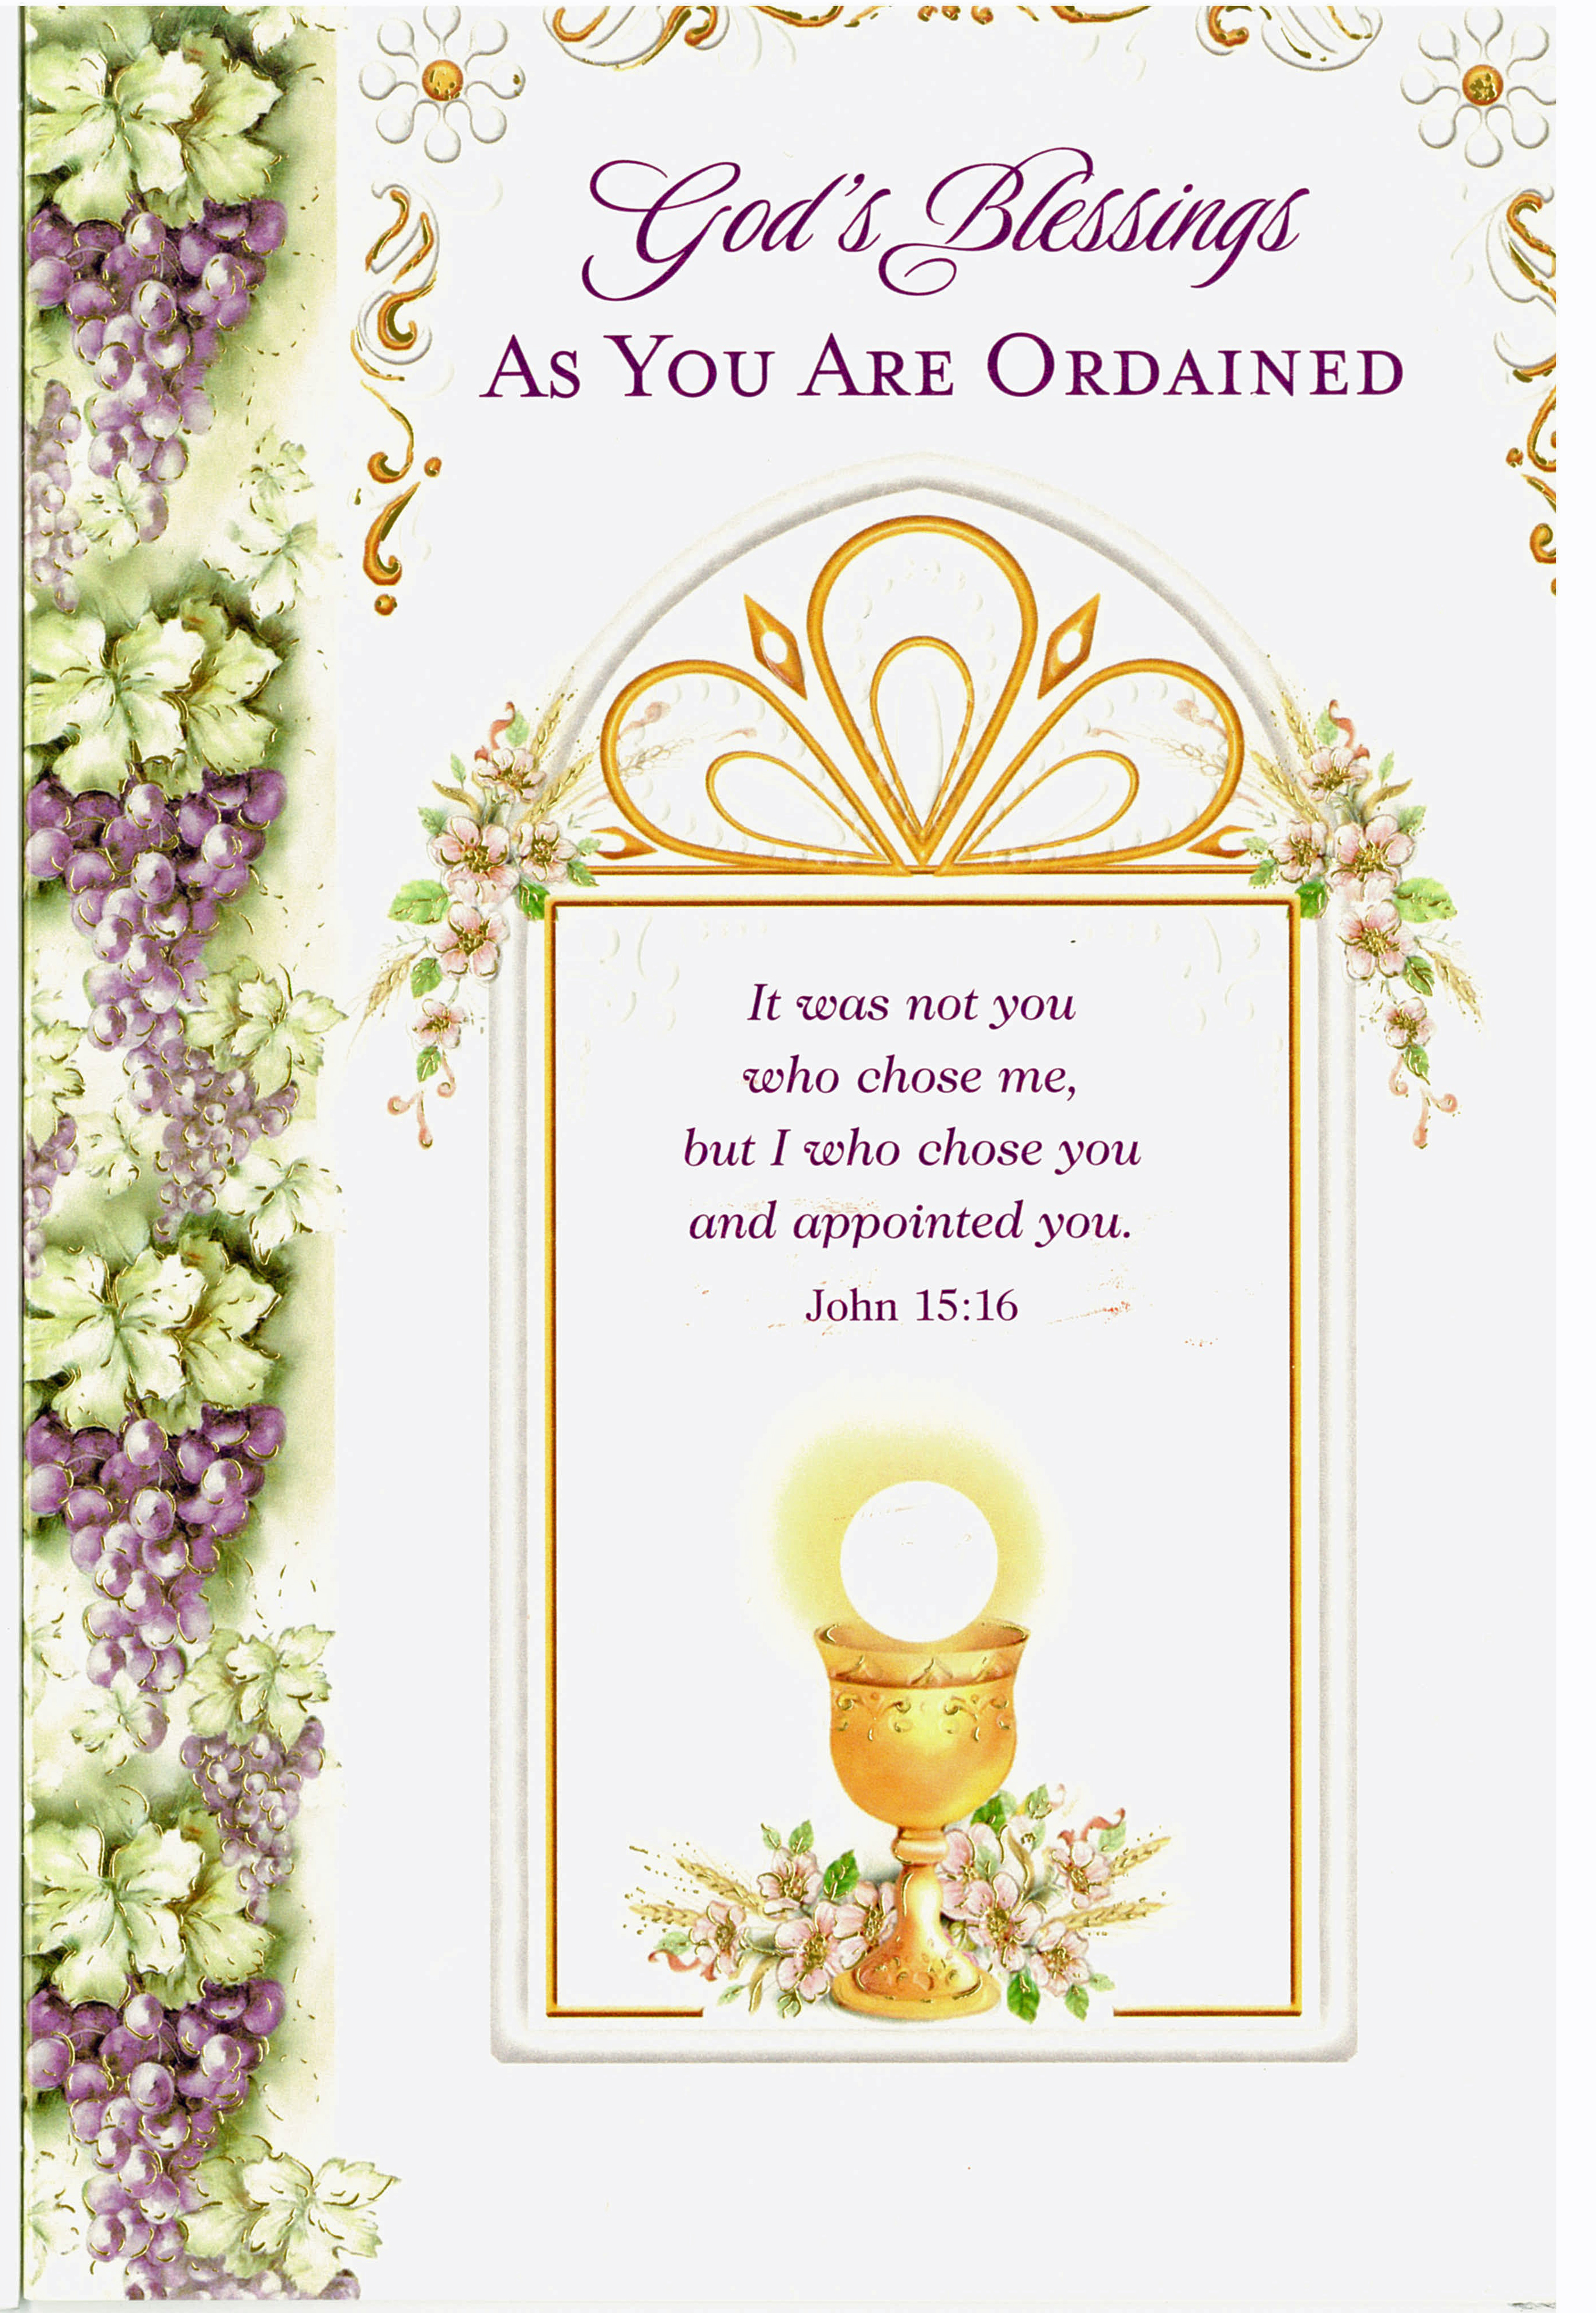 God's Blessings As You Are Ordained 238-ORD89953